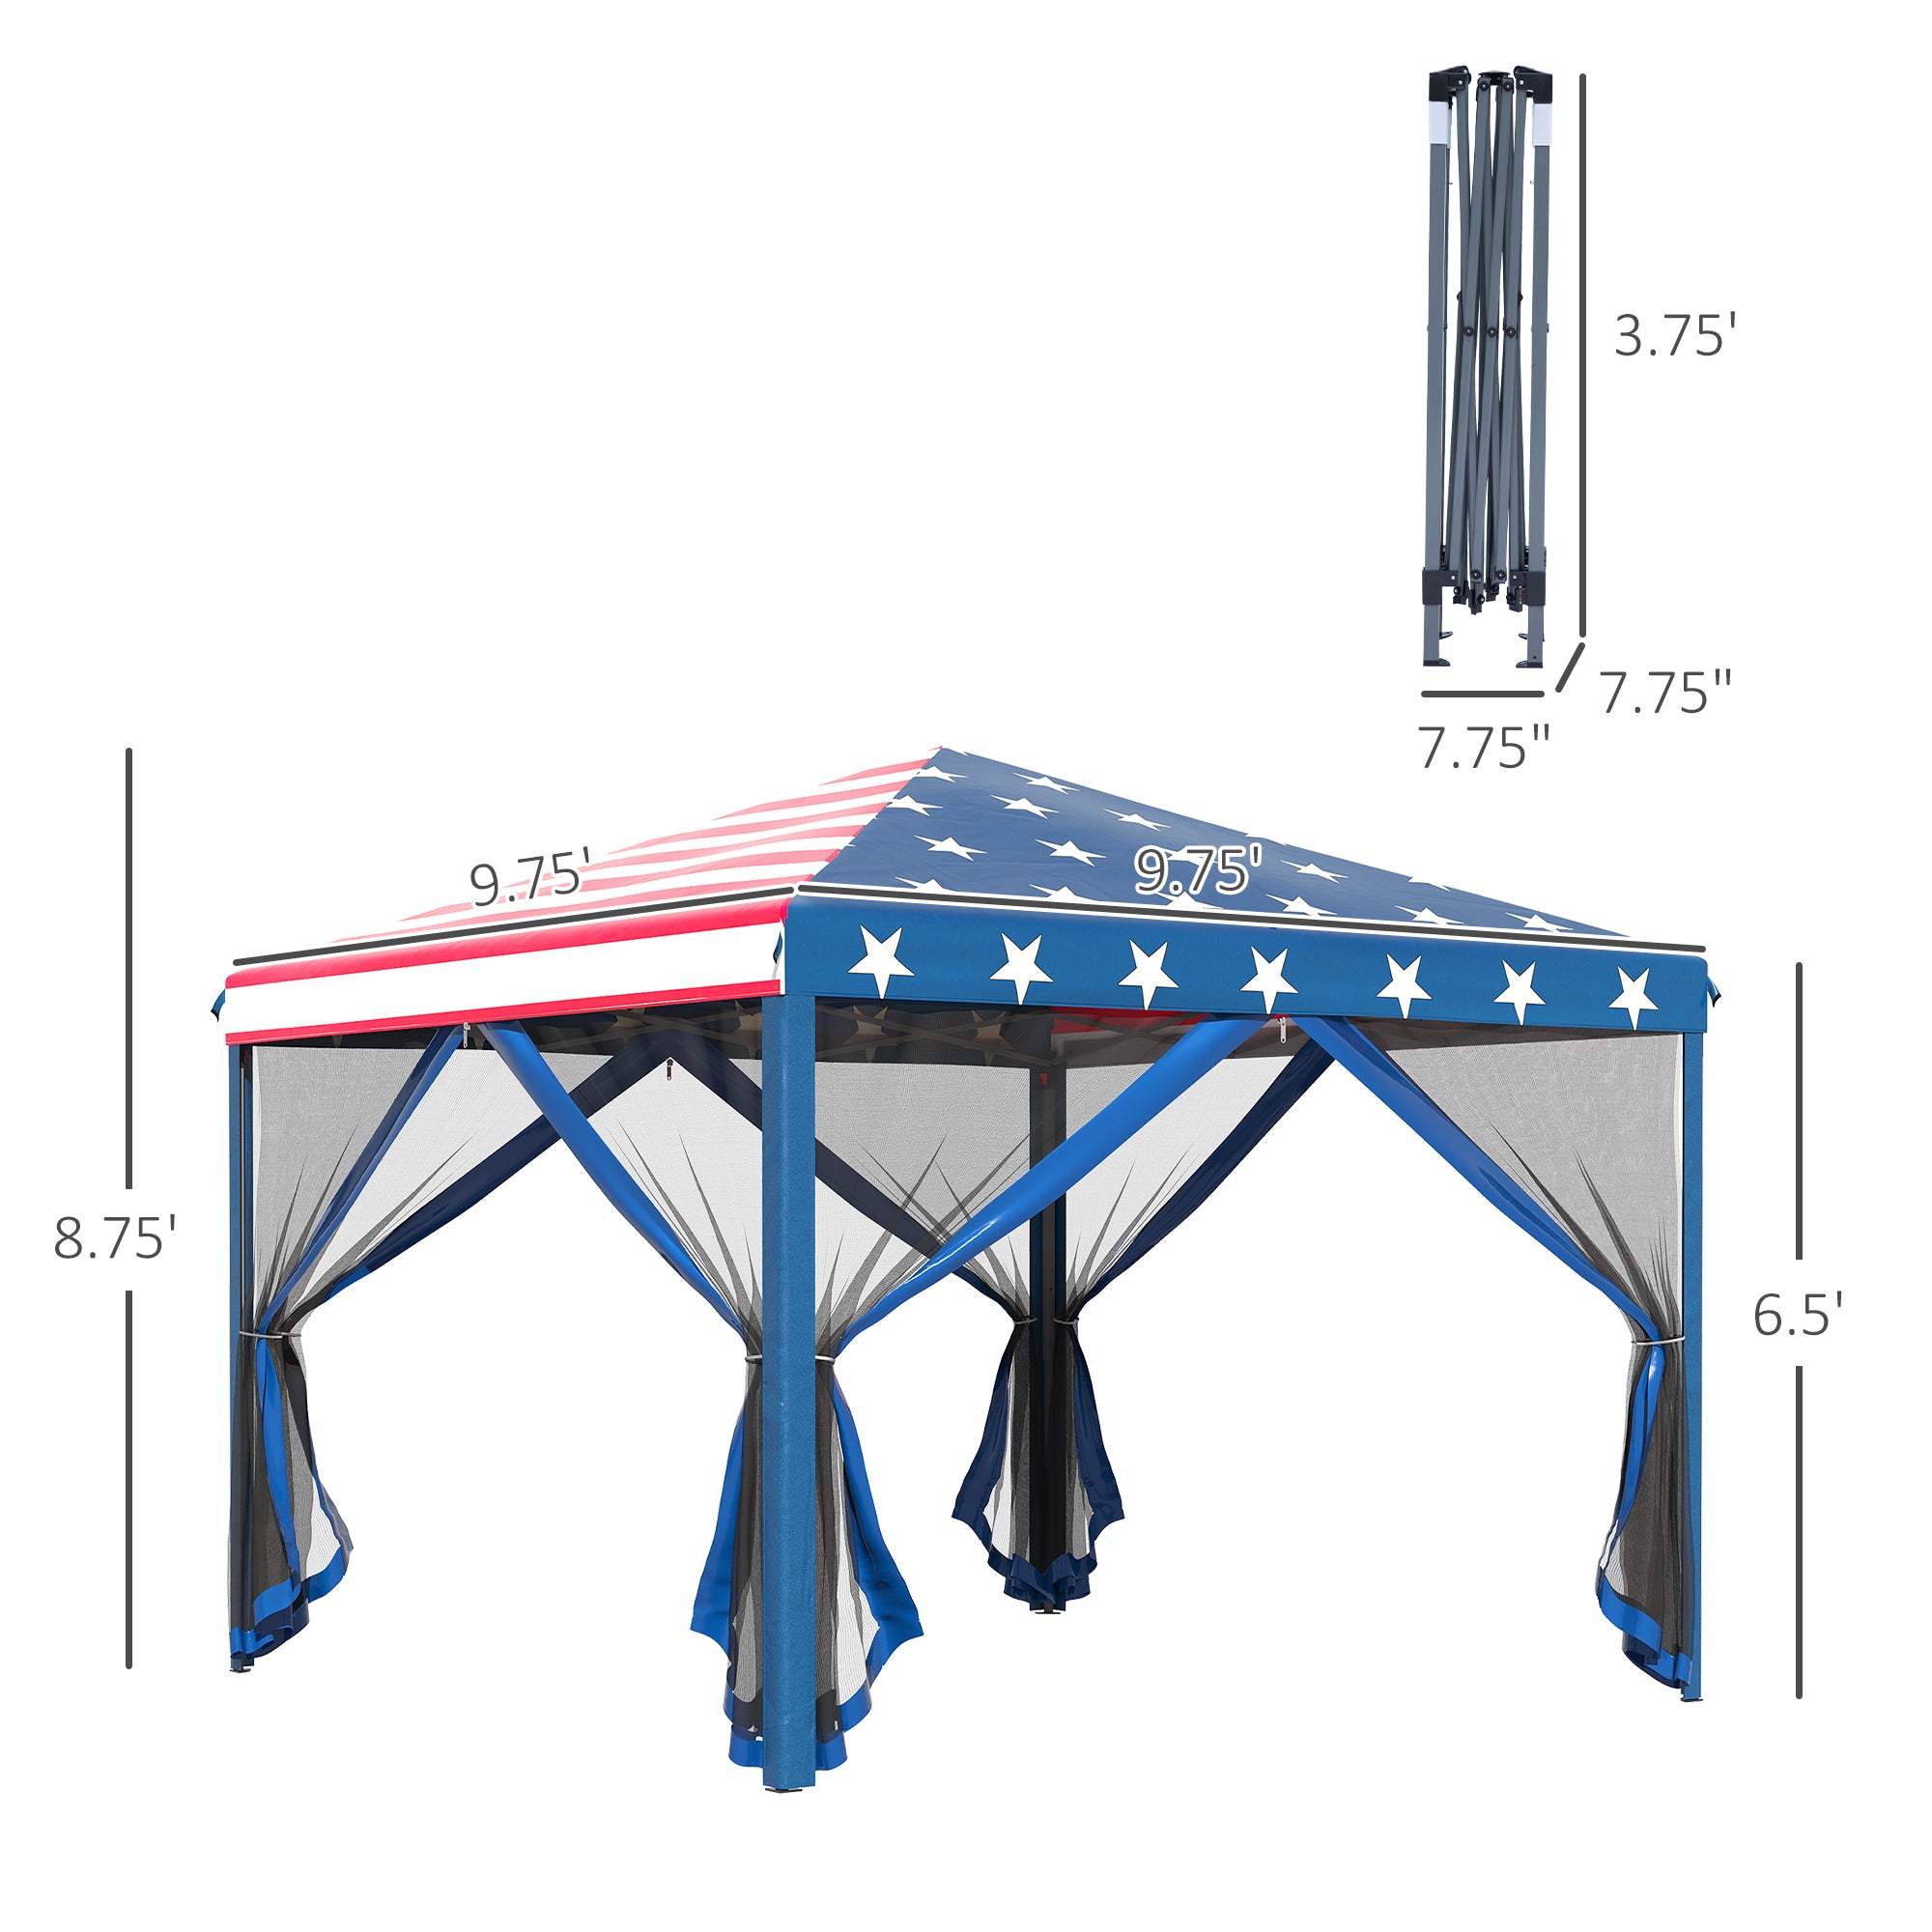 Outsunny 10' x 10' Pop Up Canopy Tent with Netting blue-steel